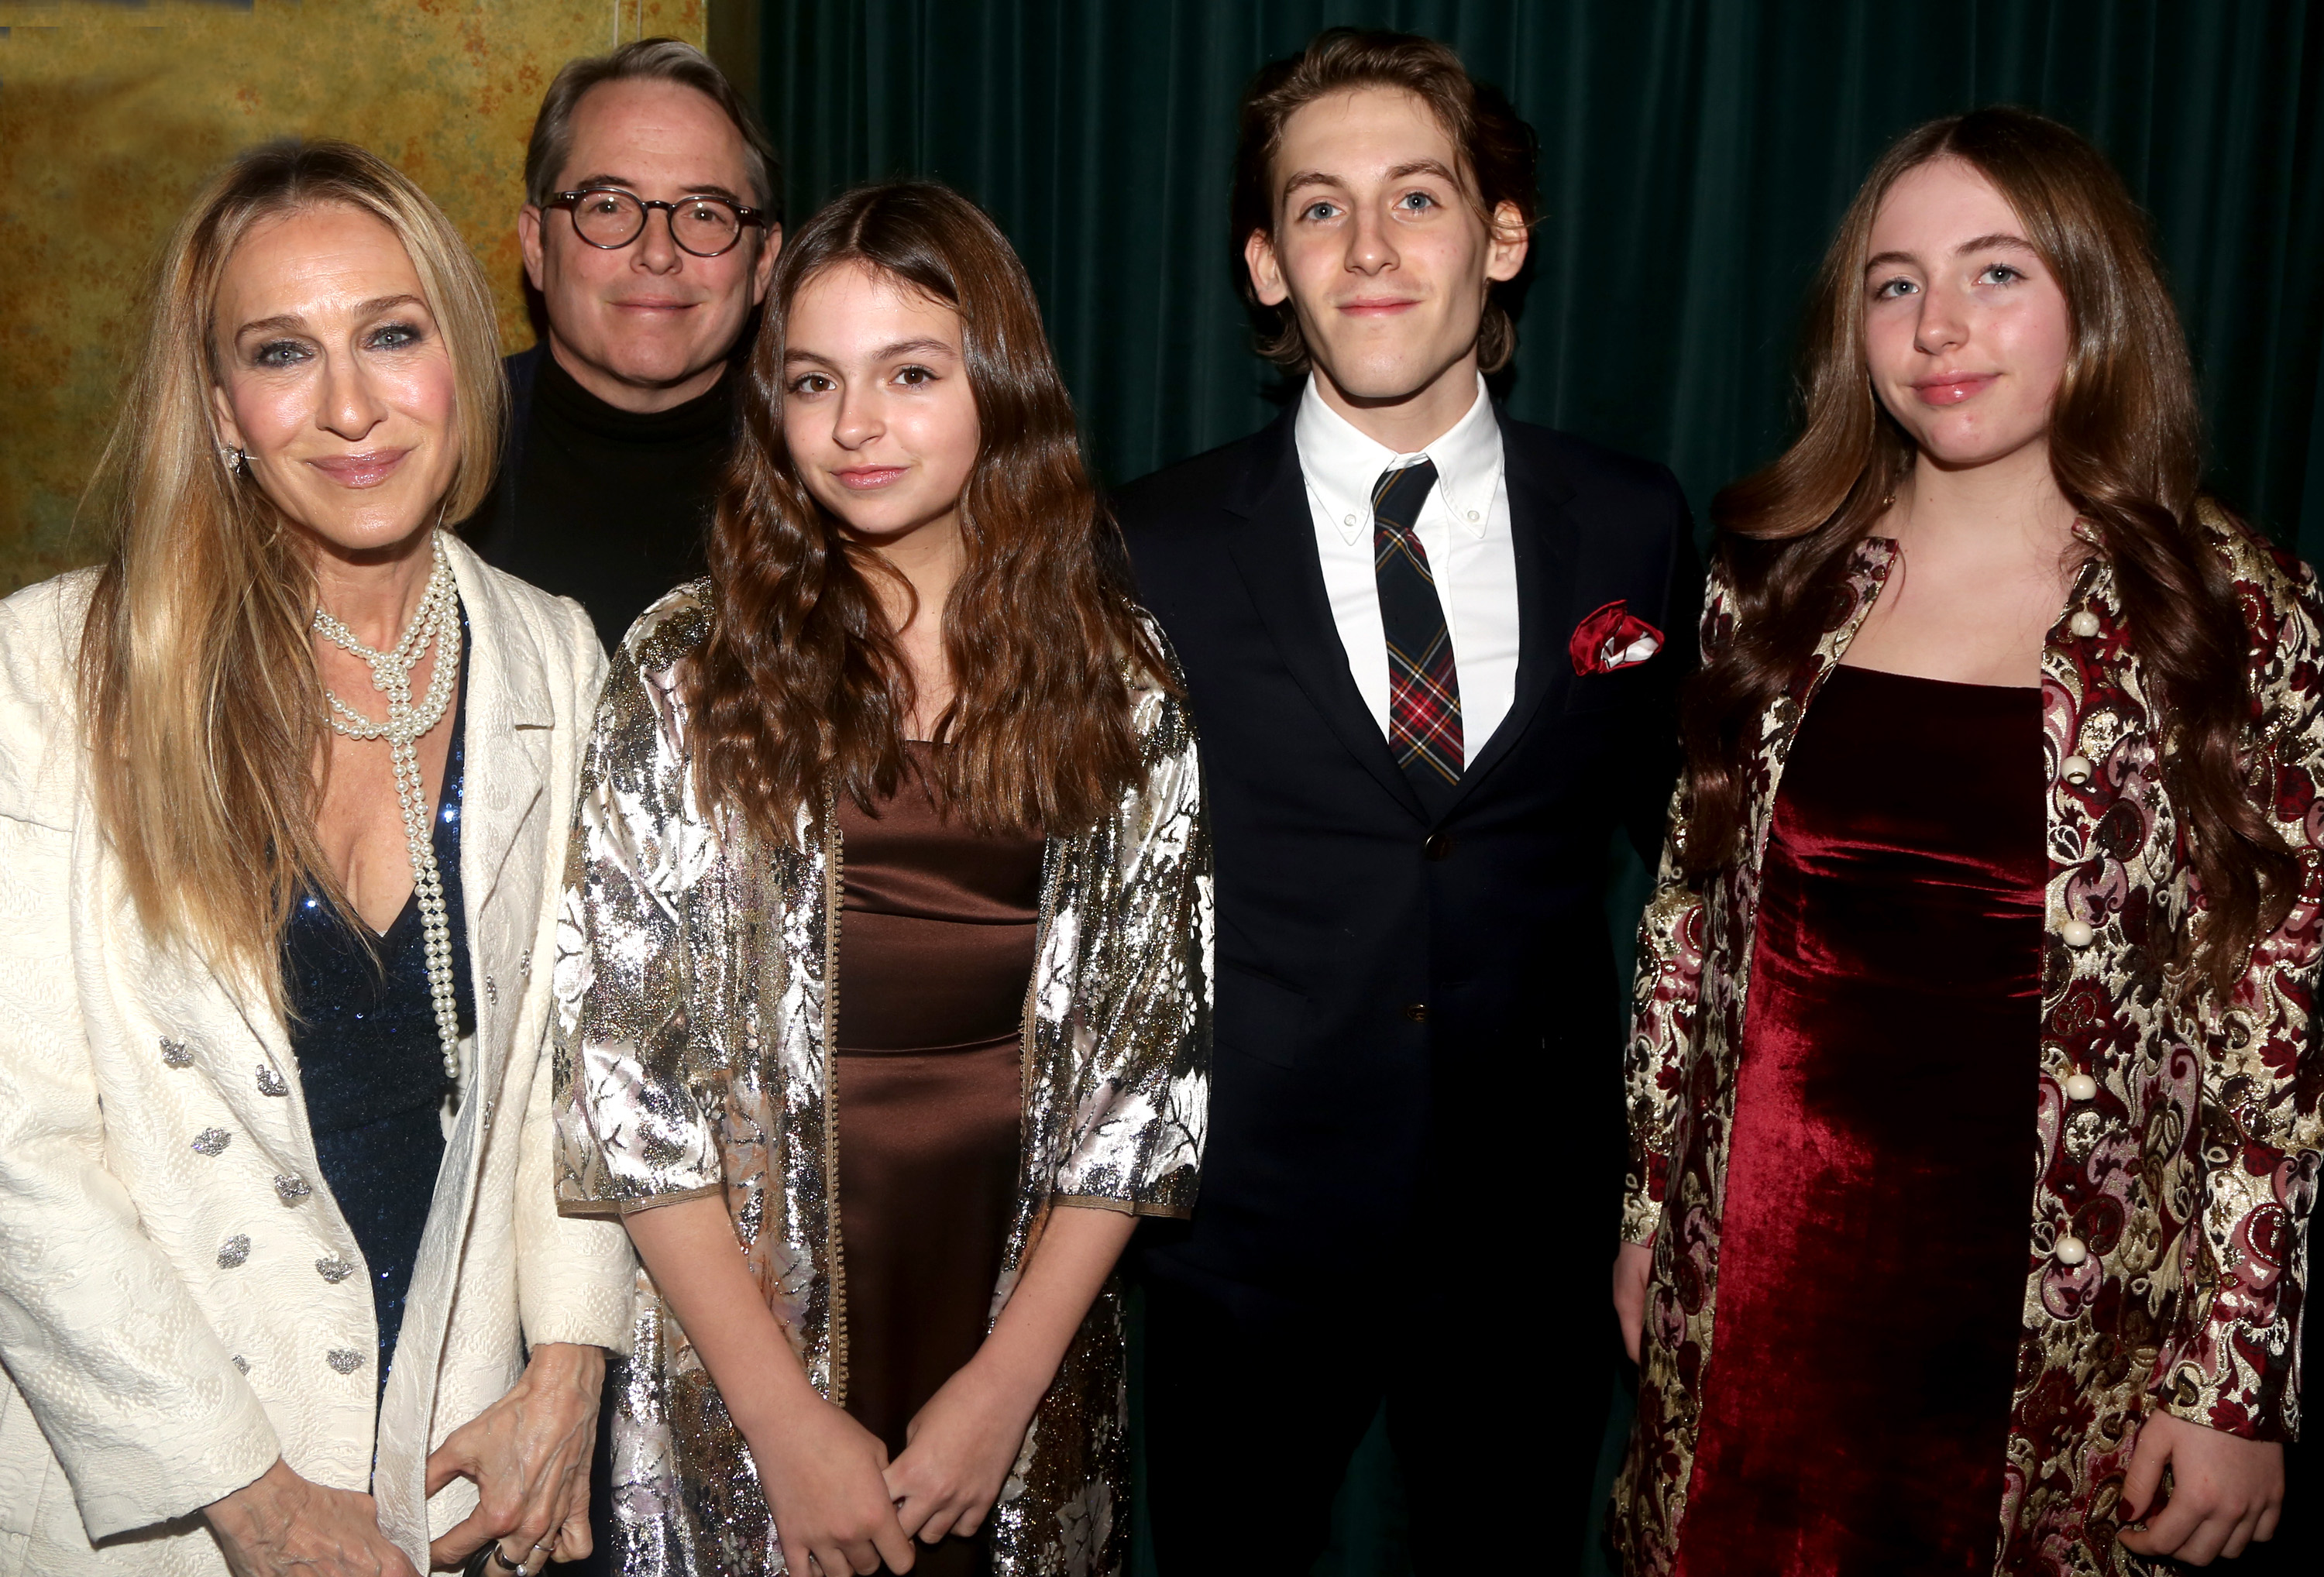 Matthew Broderick, Sarah Jessica Parker, their children Tabitha, James, and Marion Broderick during the opening night of the Broadway musical "Some Like It Hot!" in New York City on December 11, 2022 | Source: Getty Images